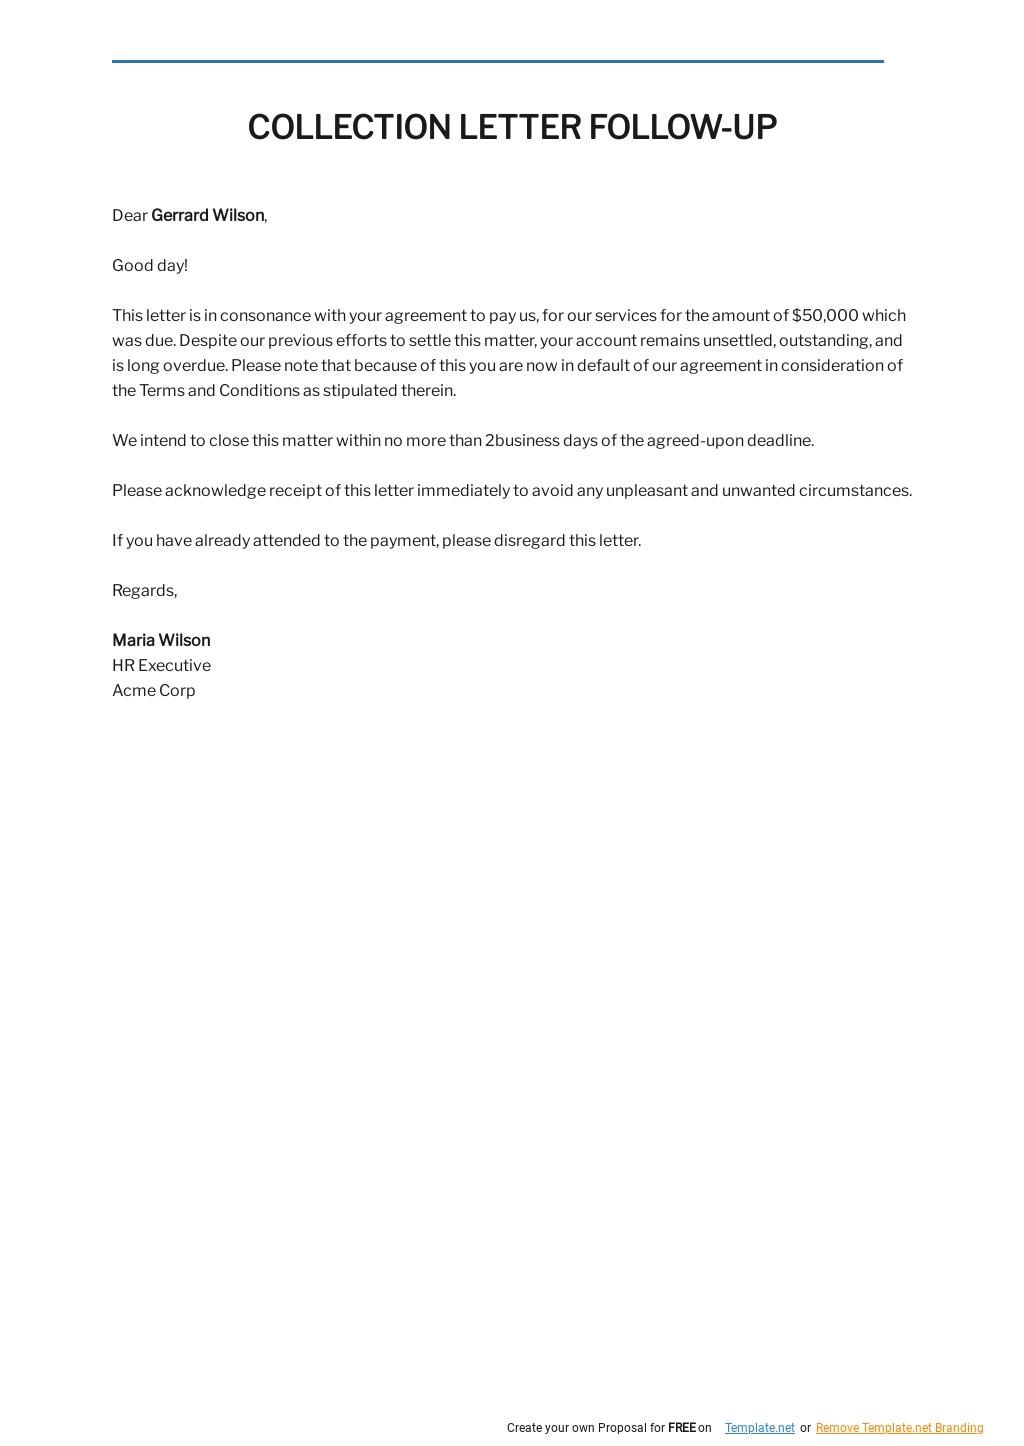 Free Collection Letter Follow-Up Template - Google Docs, Word